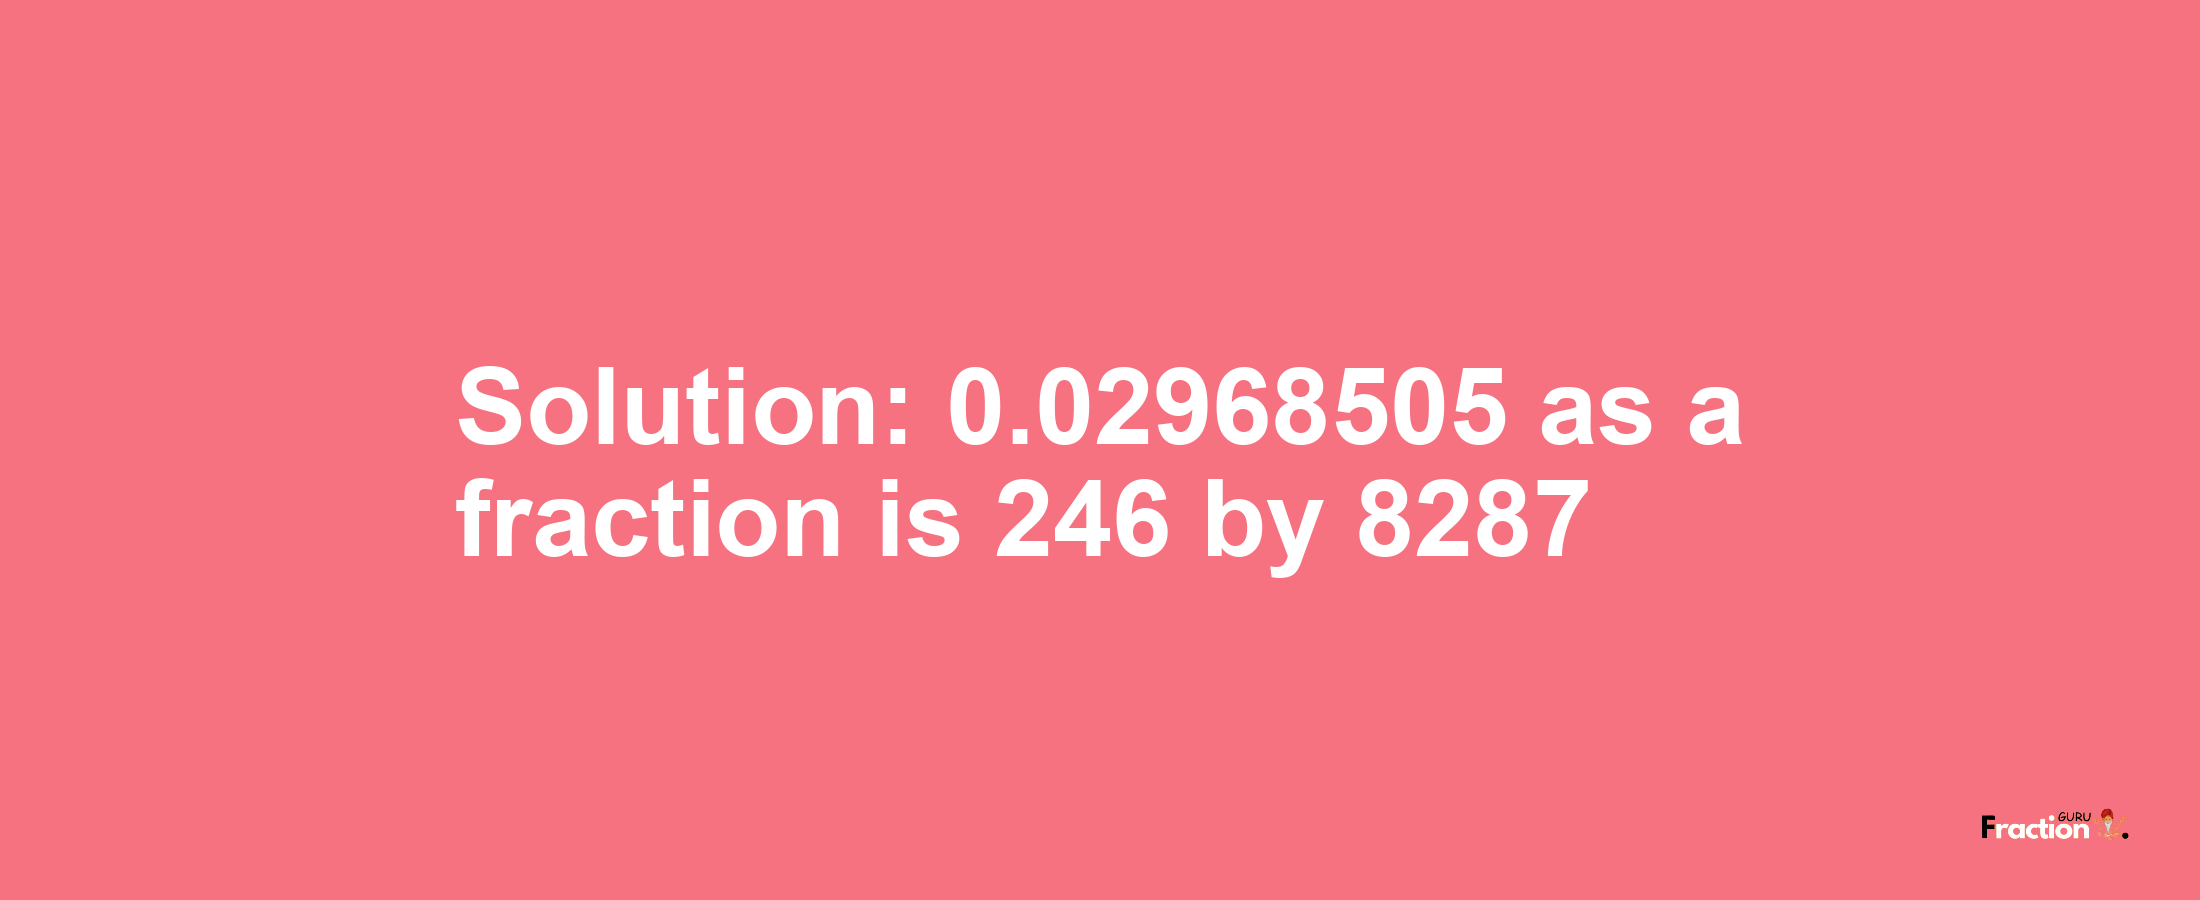 Solution:0.02968505 as a fraction is 246/8287